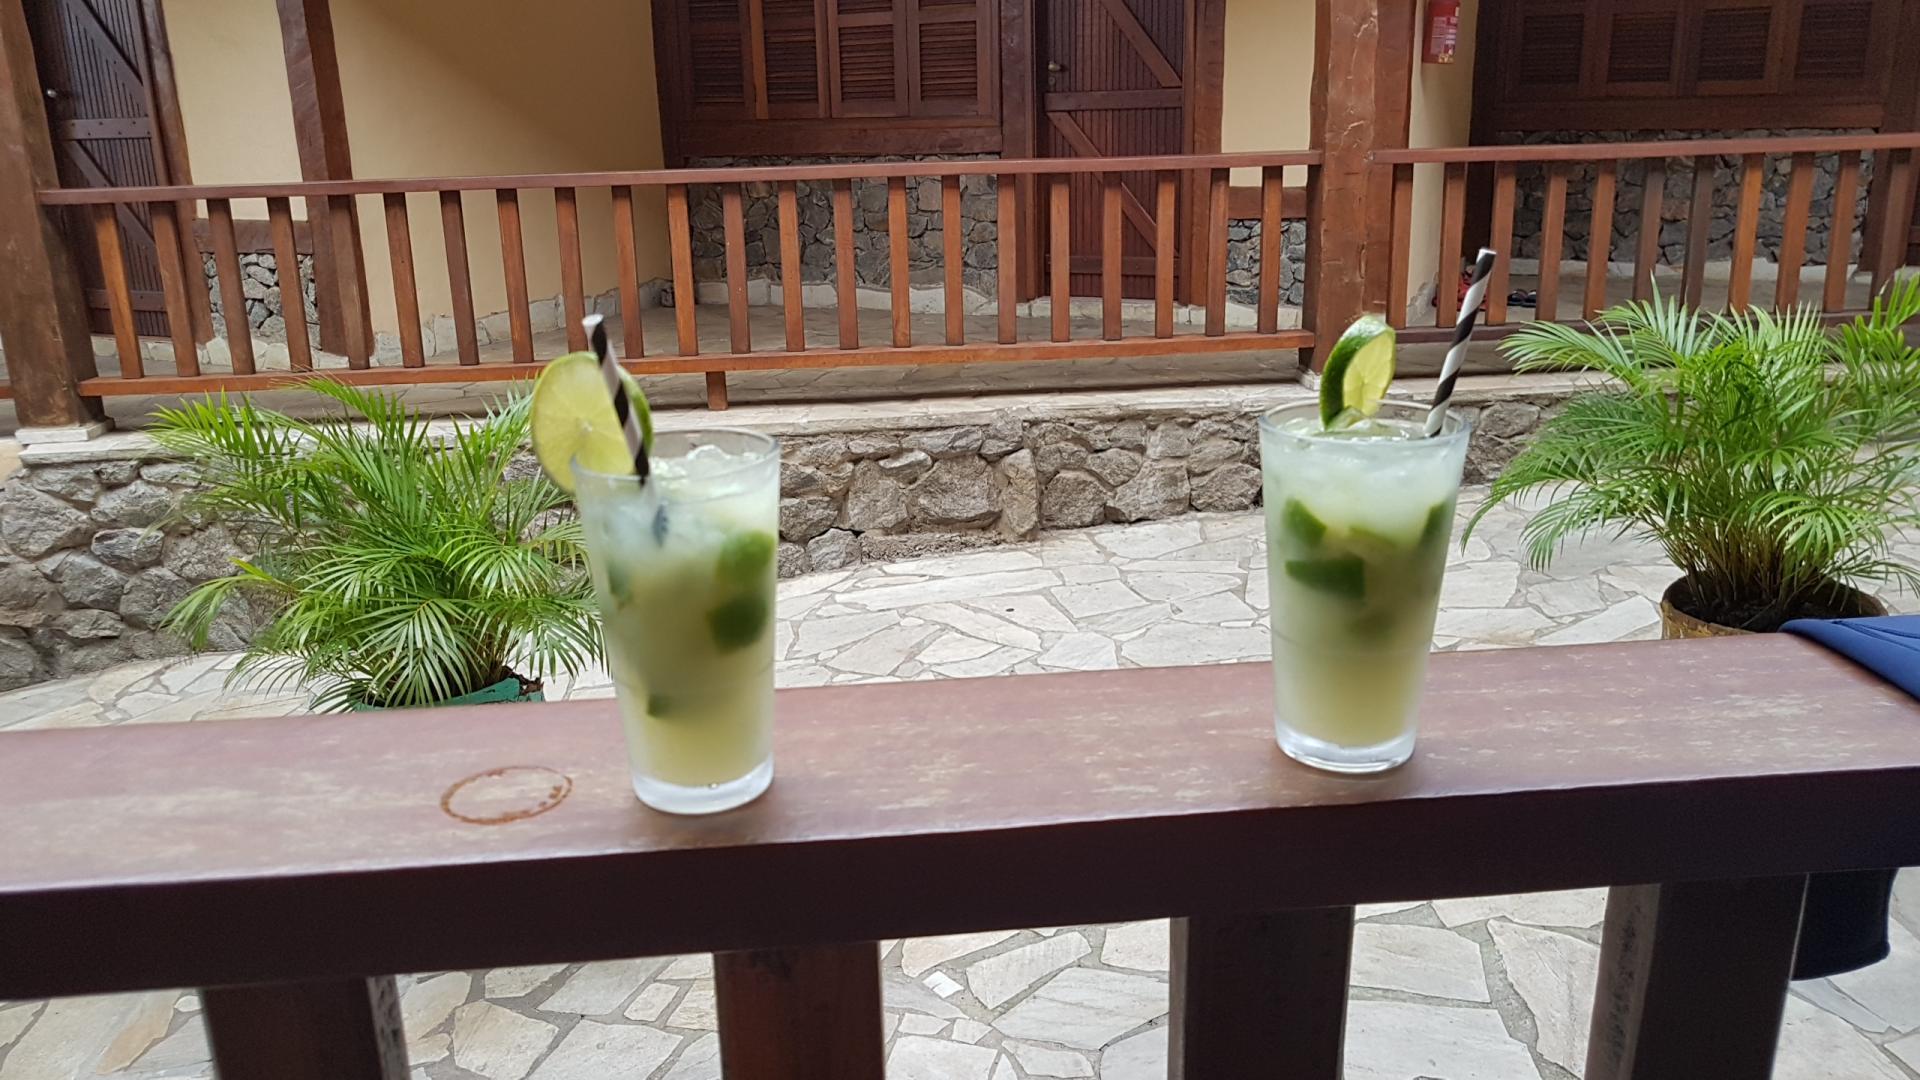 Brazil’s most popular drink, the caipirinha, entices millions every day.